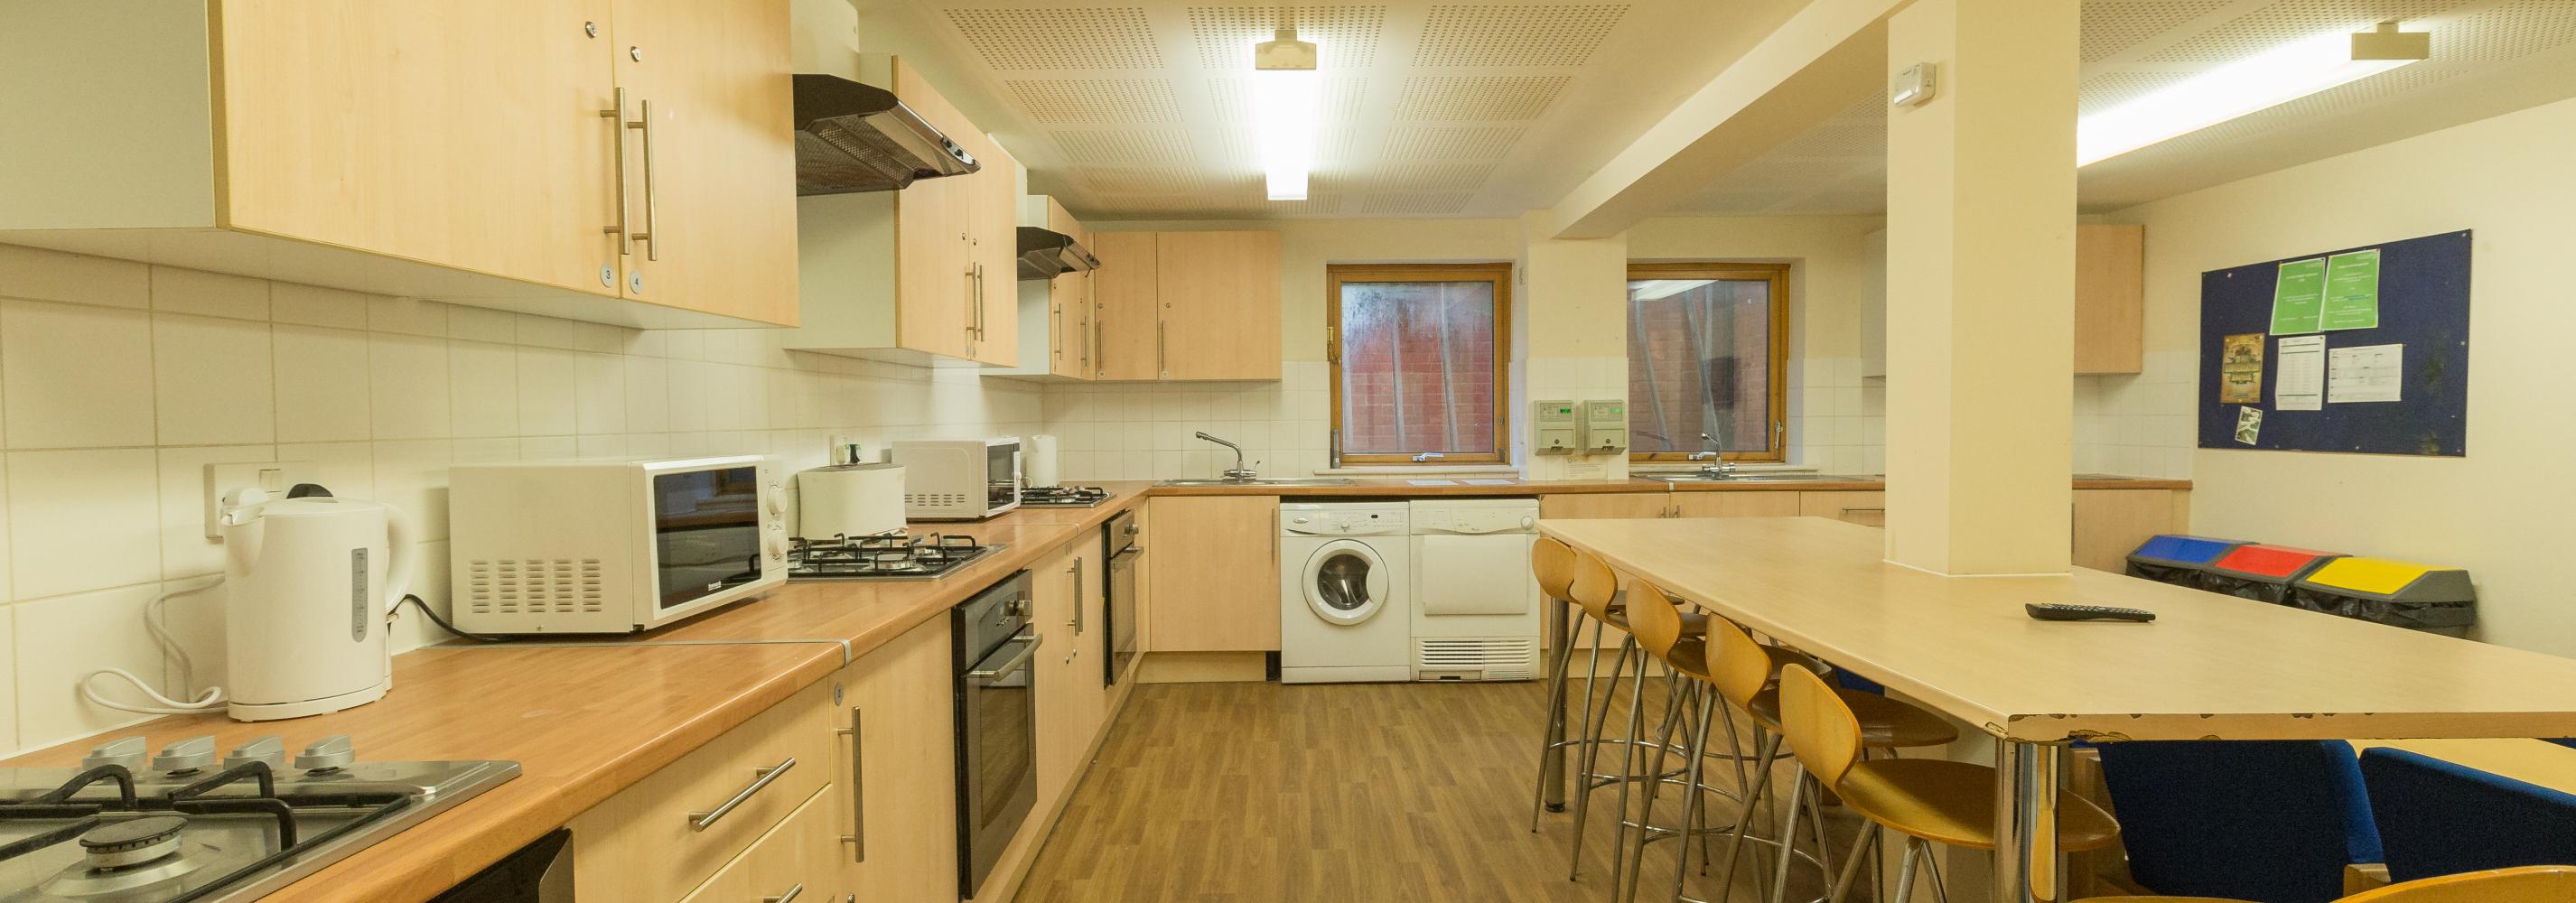 Kitchen, 3 gas cookers, 3 ovens, 3 extractor fans, 2 microwaves, 2 kettles, 2 windows, washing machine, dryer, noticeboard, toaster, dining table, 6 wooden bar stools, cupboards and bins